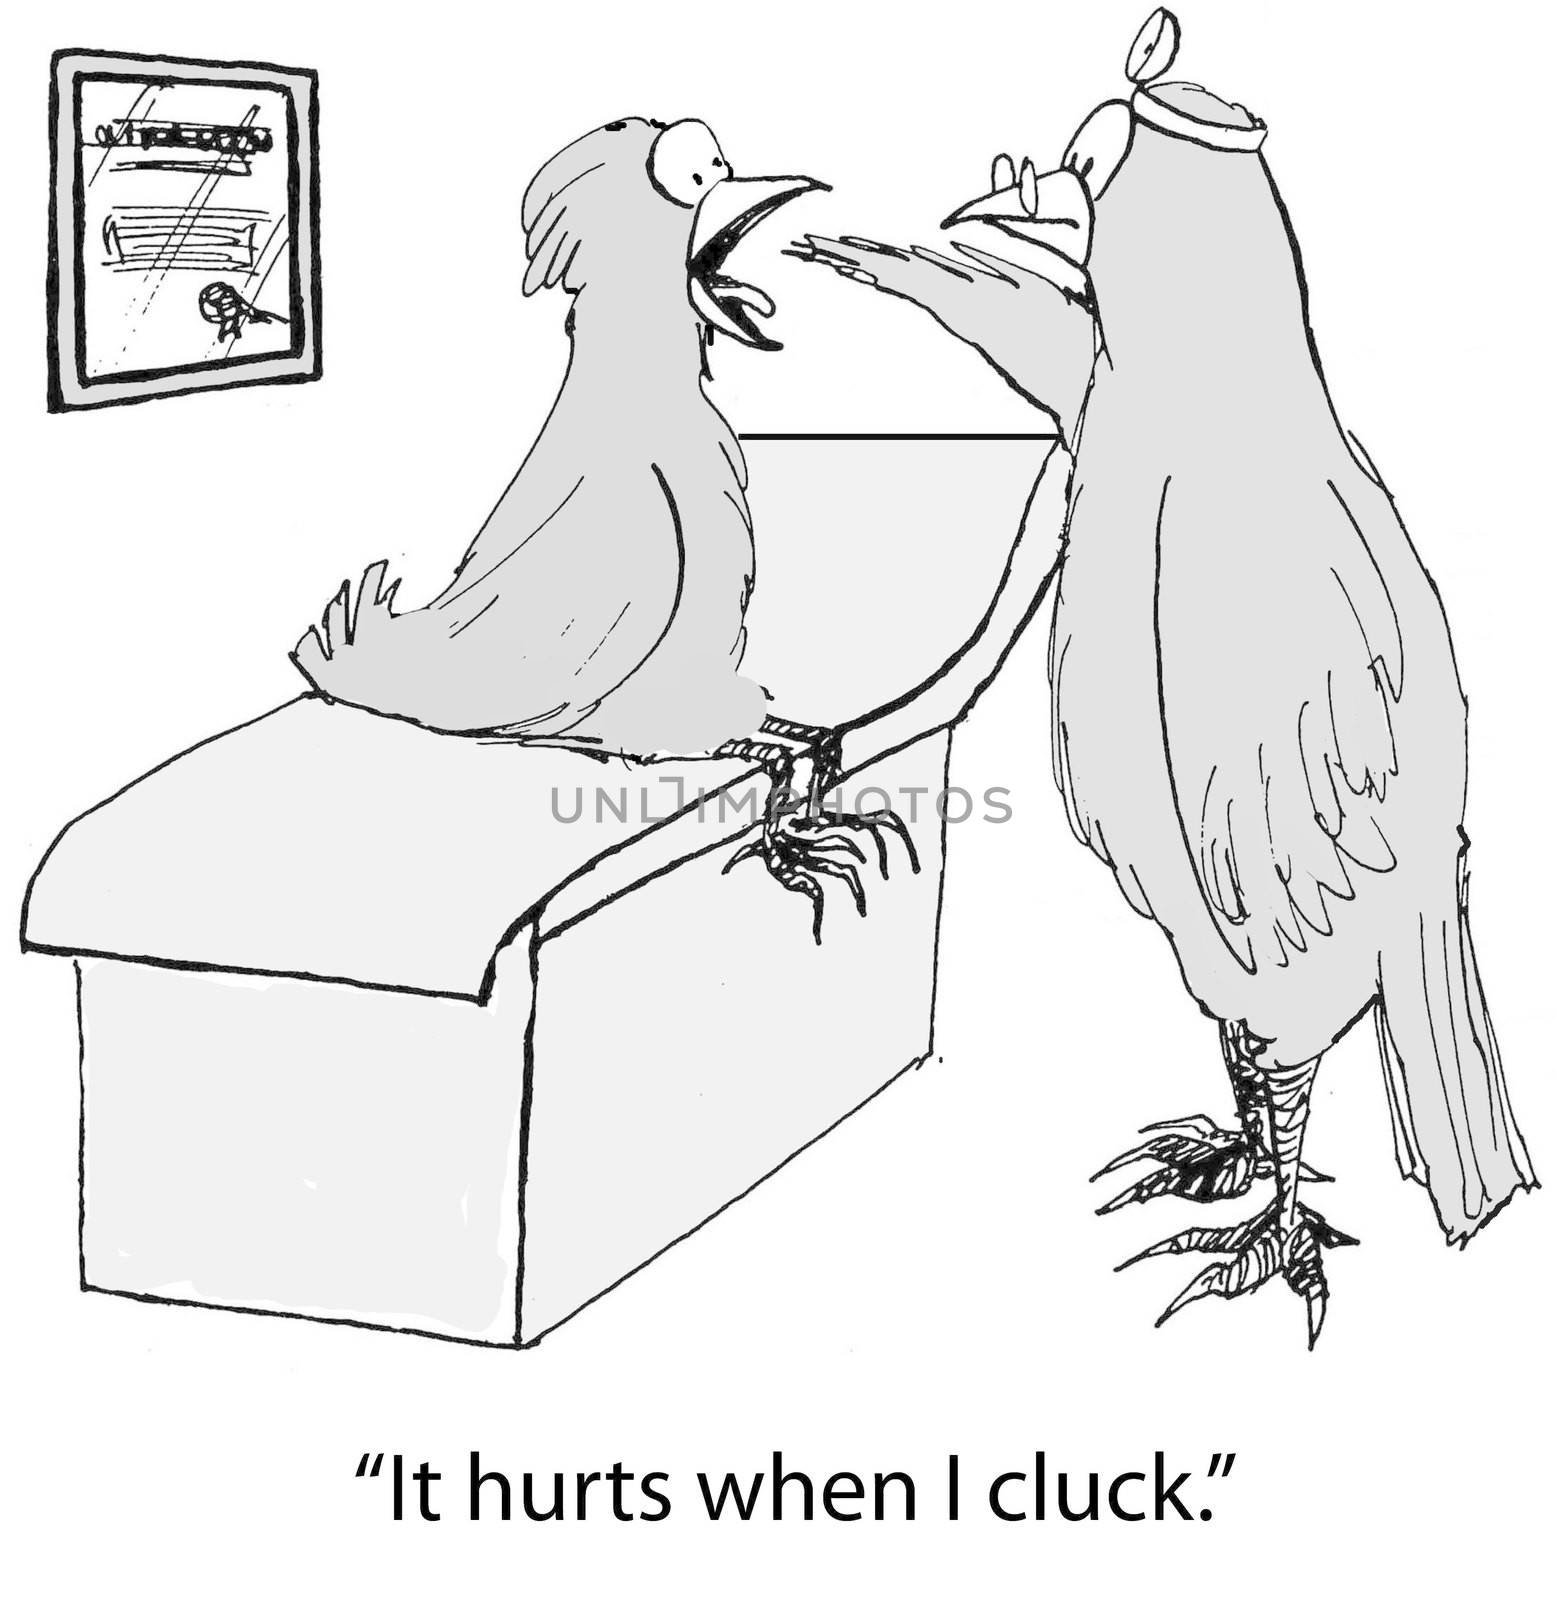 "It hurts when I cluck."